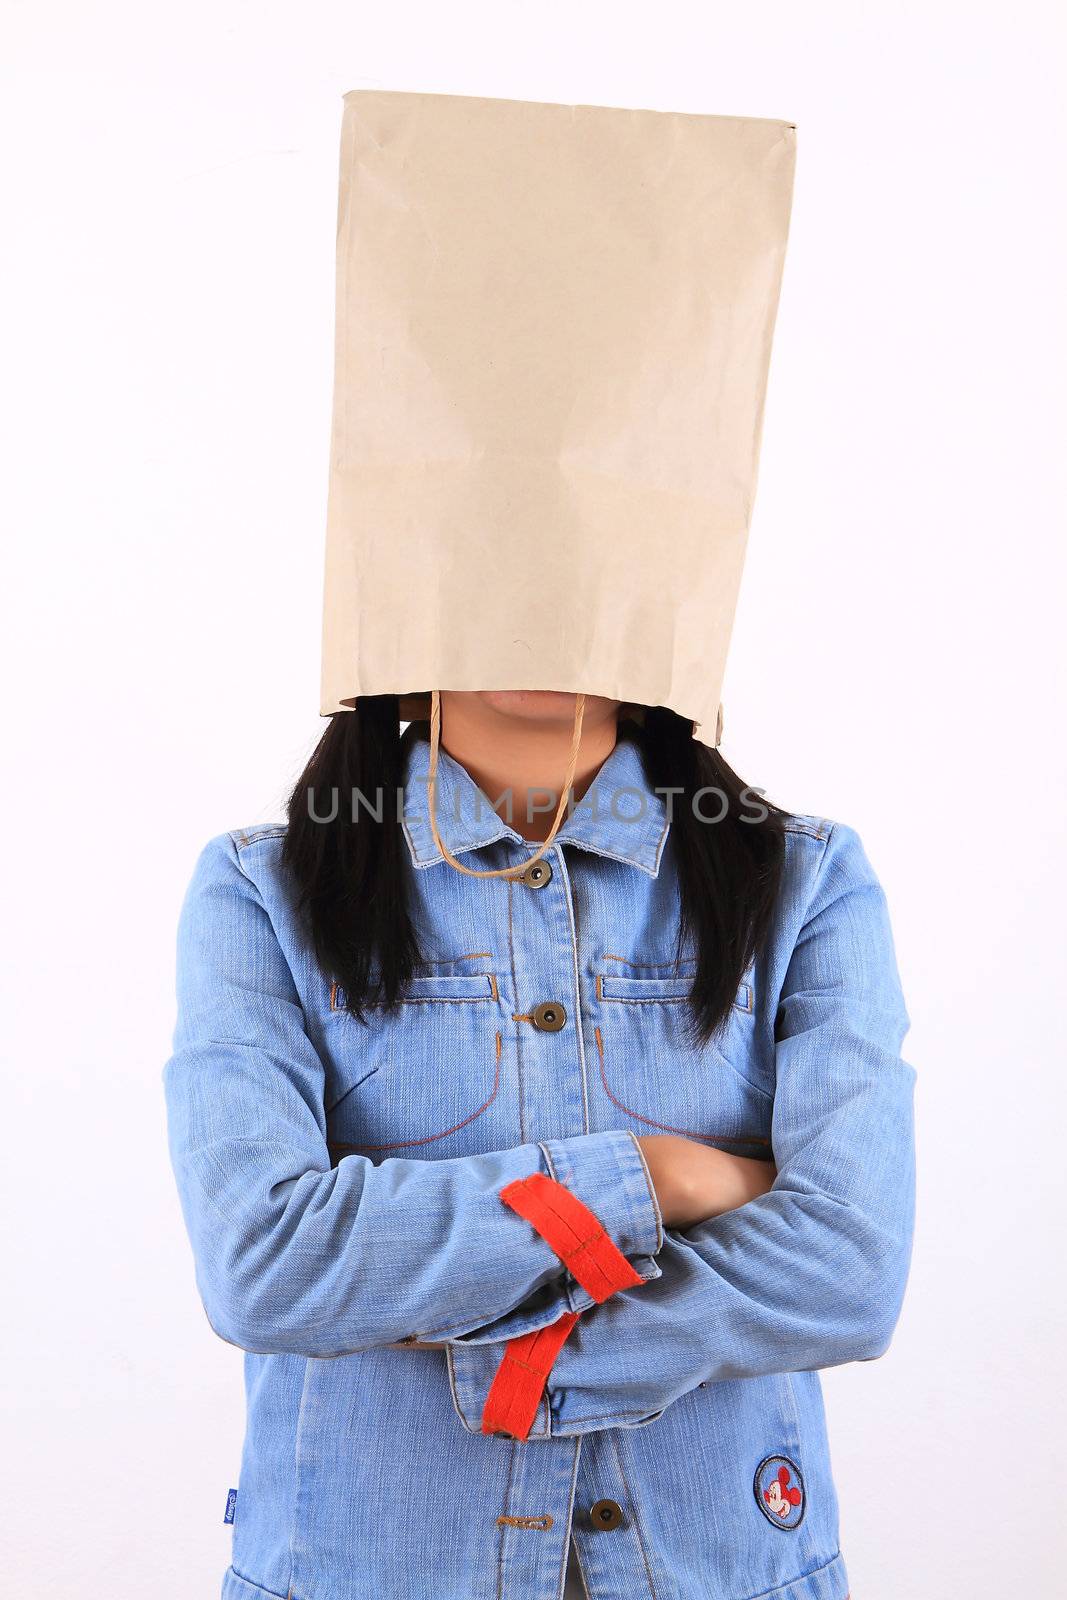 Woman with paper bag on head  by rufous